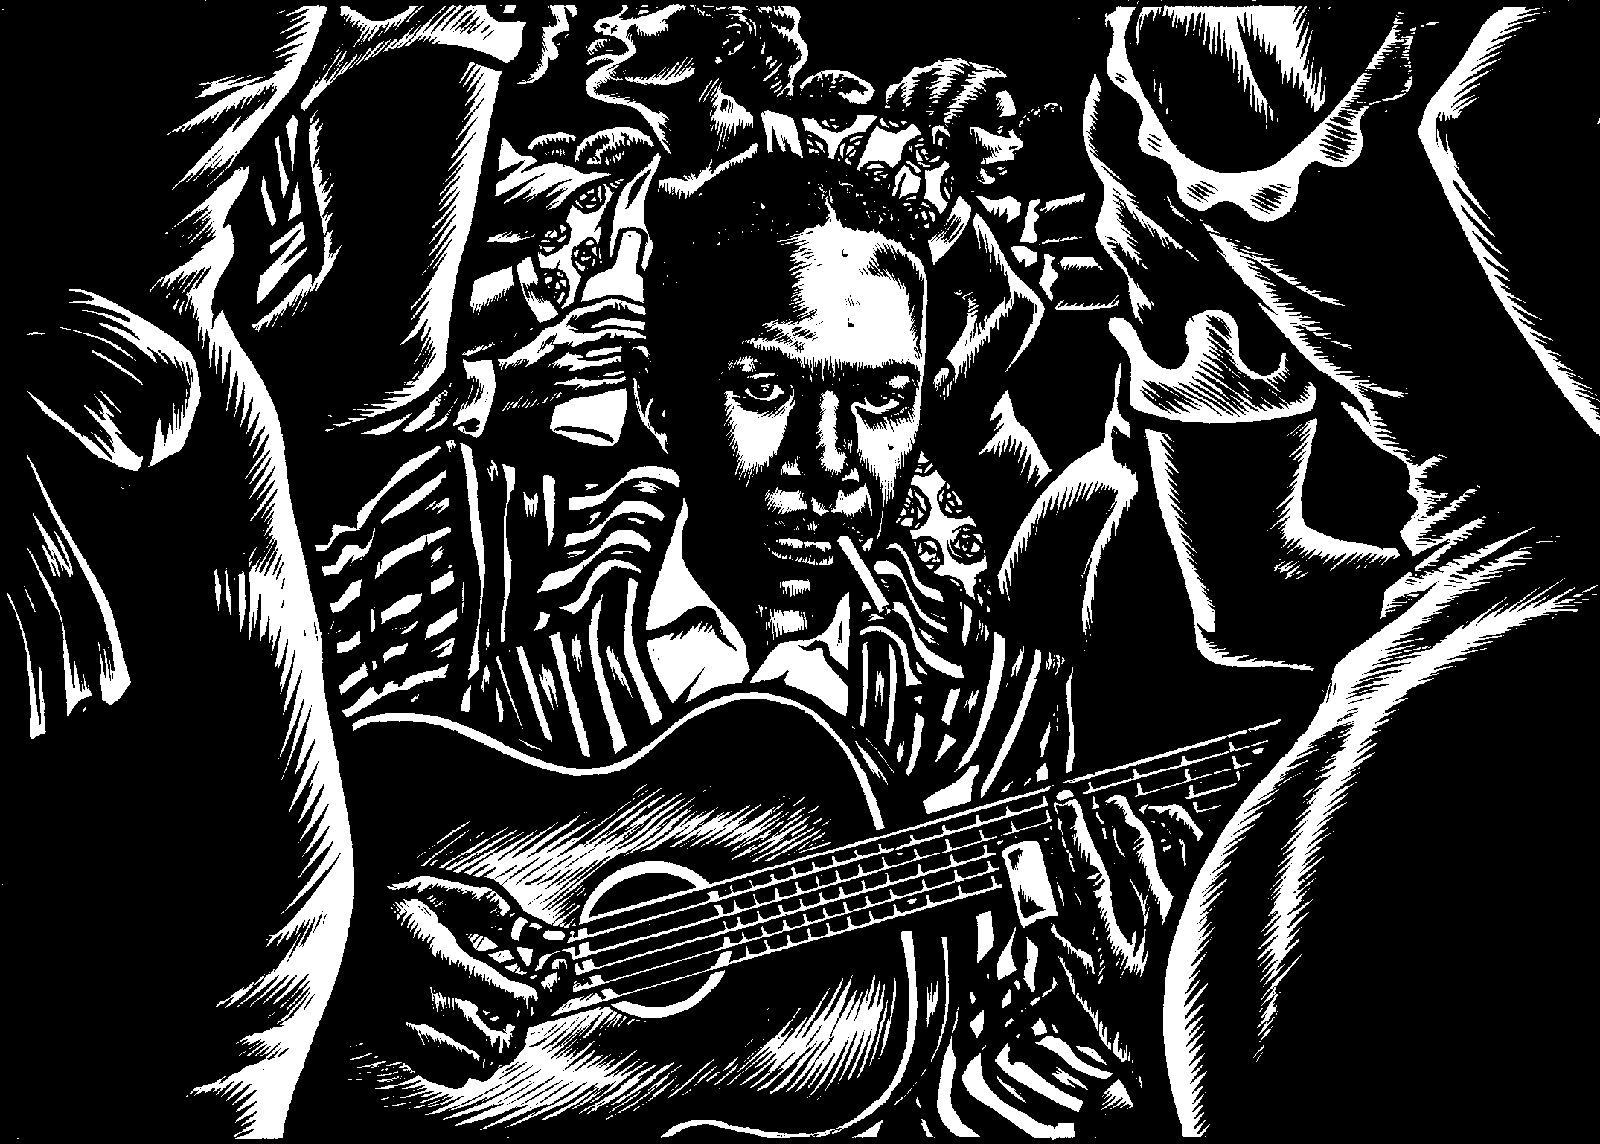 Robert Johnson; from Mezzo and J.M. Dupont’s graphic novel Love in Vain